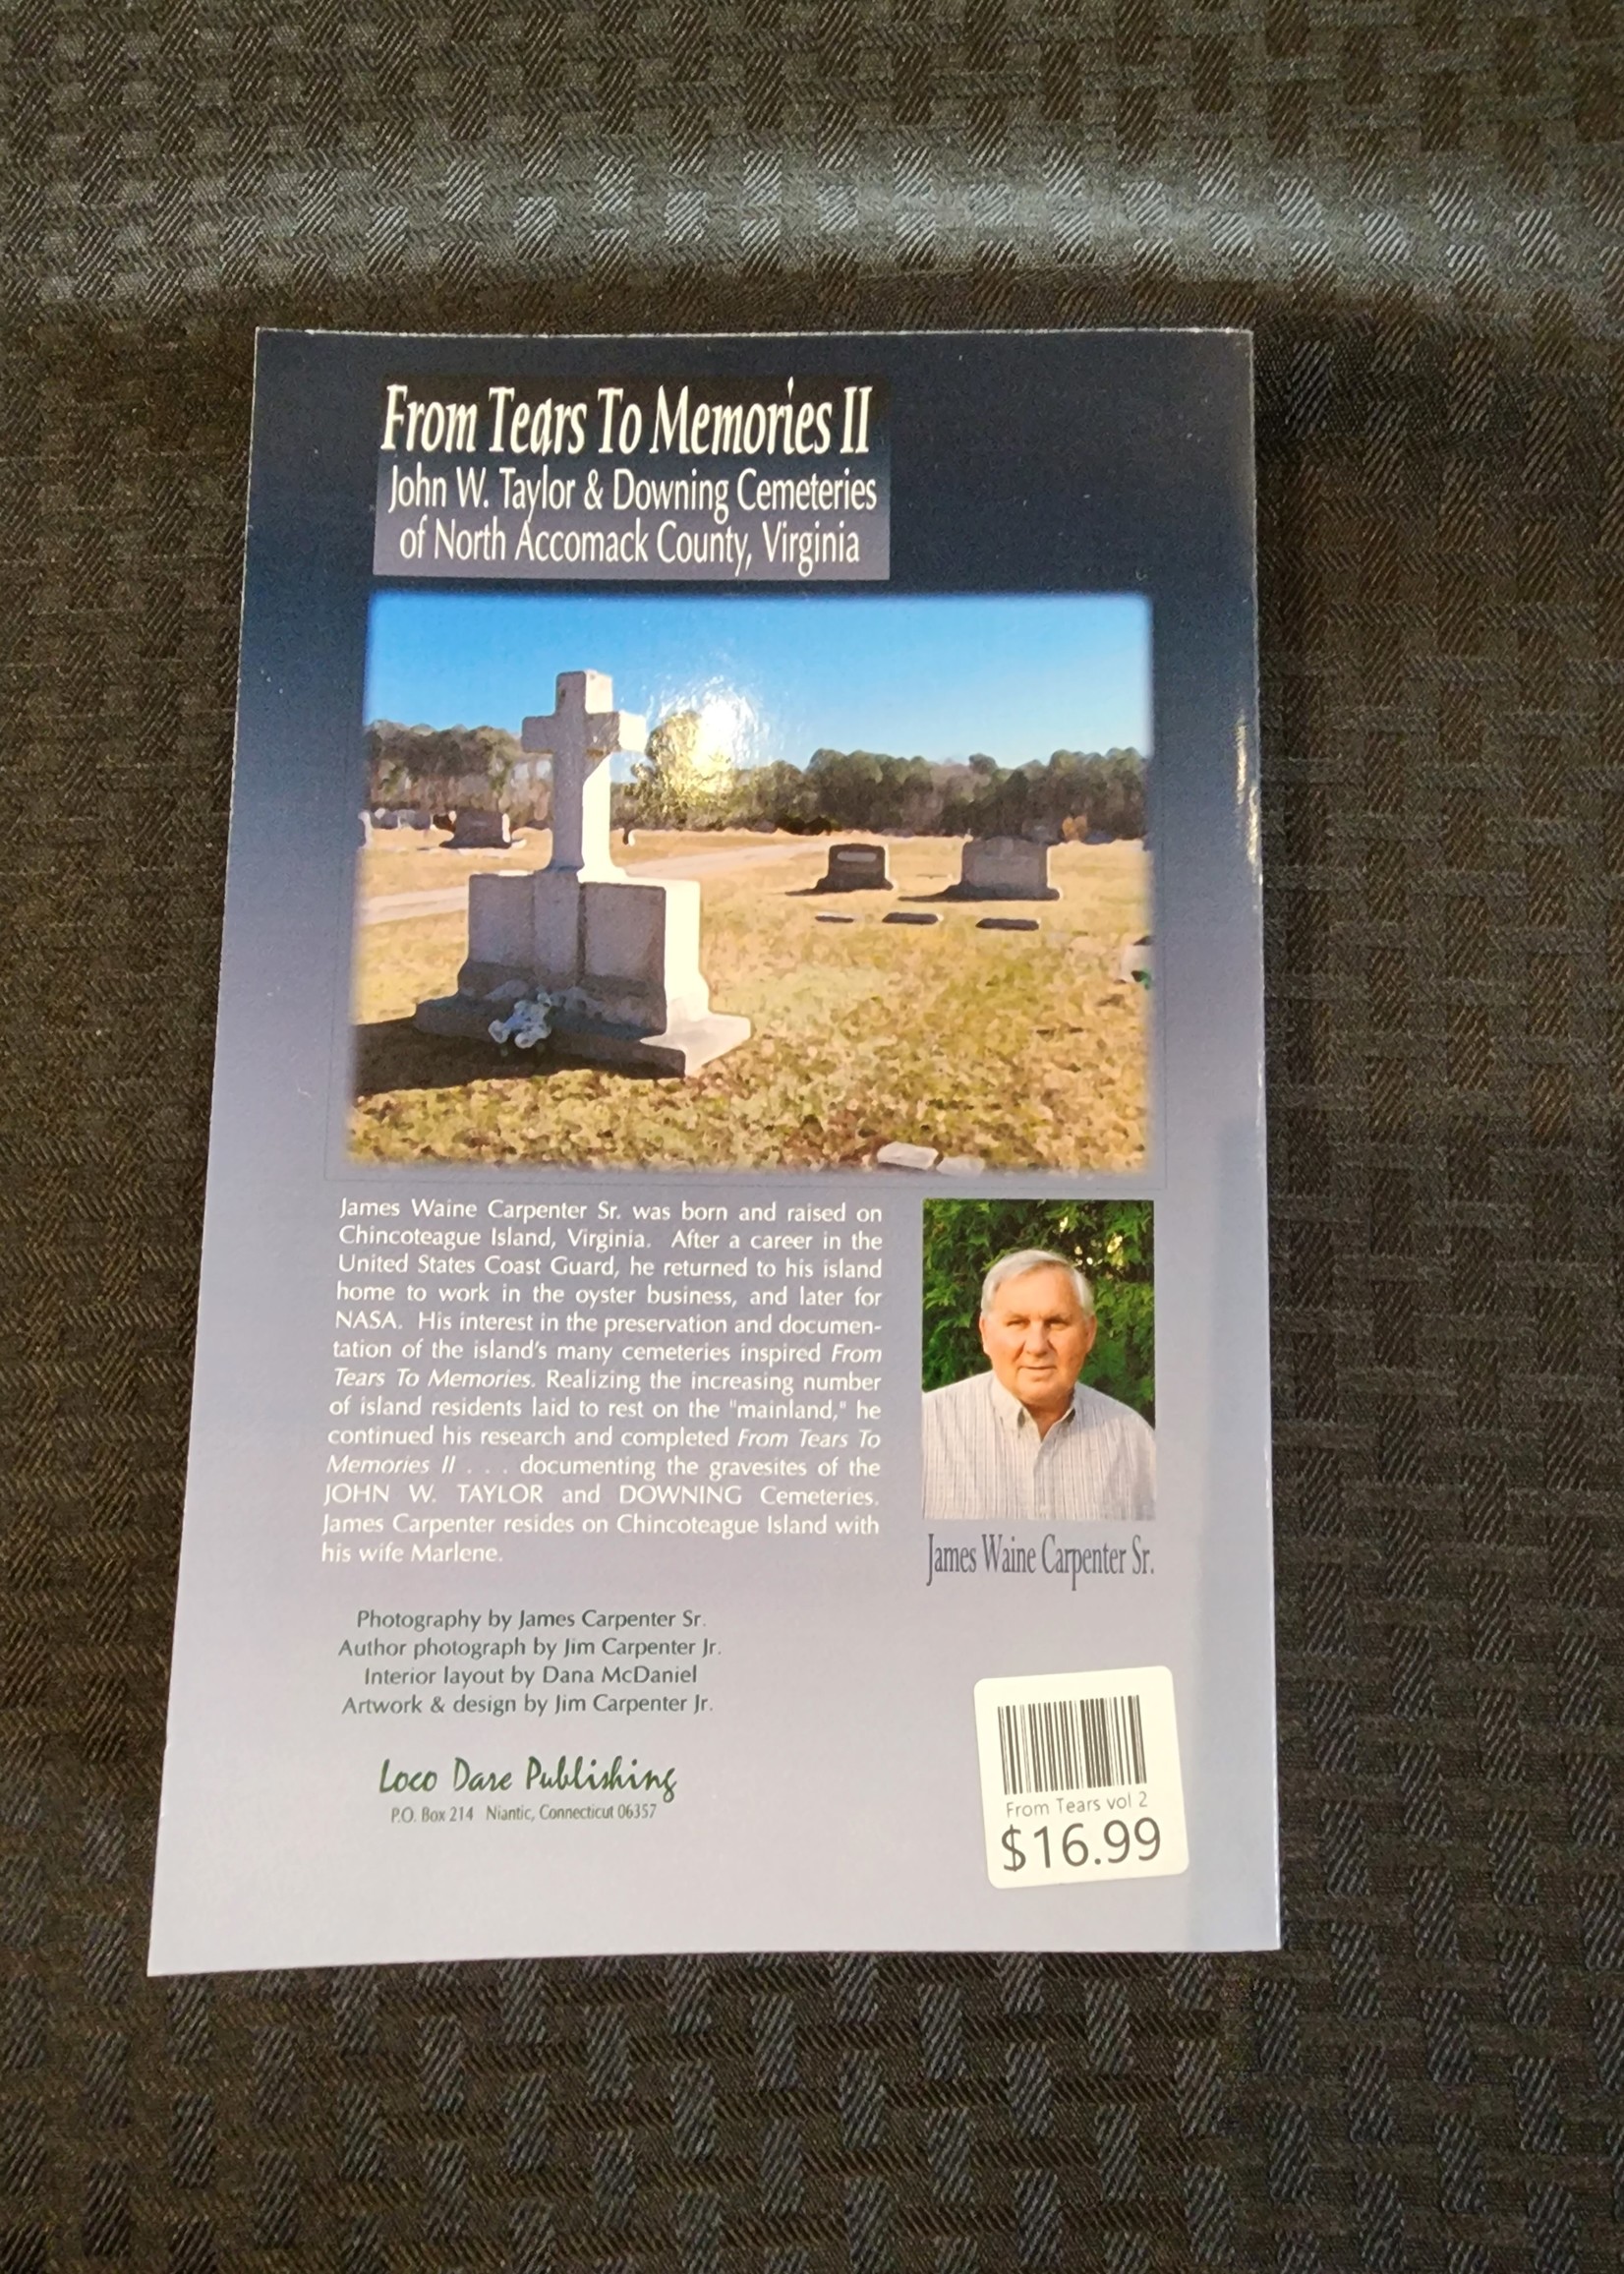 From Tears to Memories vol 2: John W Taylor and Downing Cemeteries of North Accomack County, Virginia